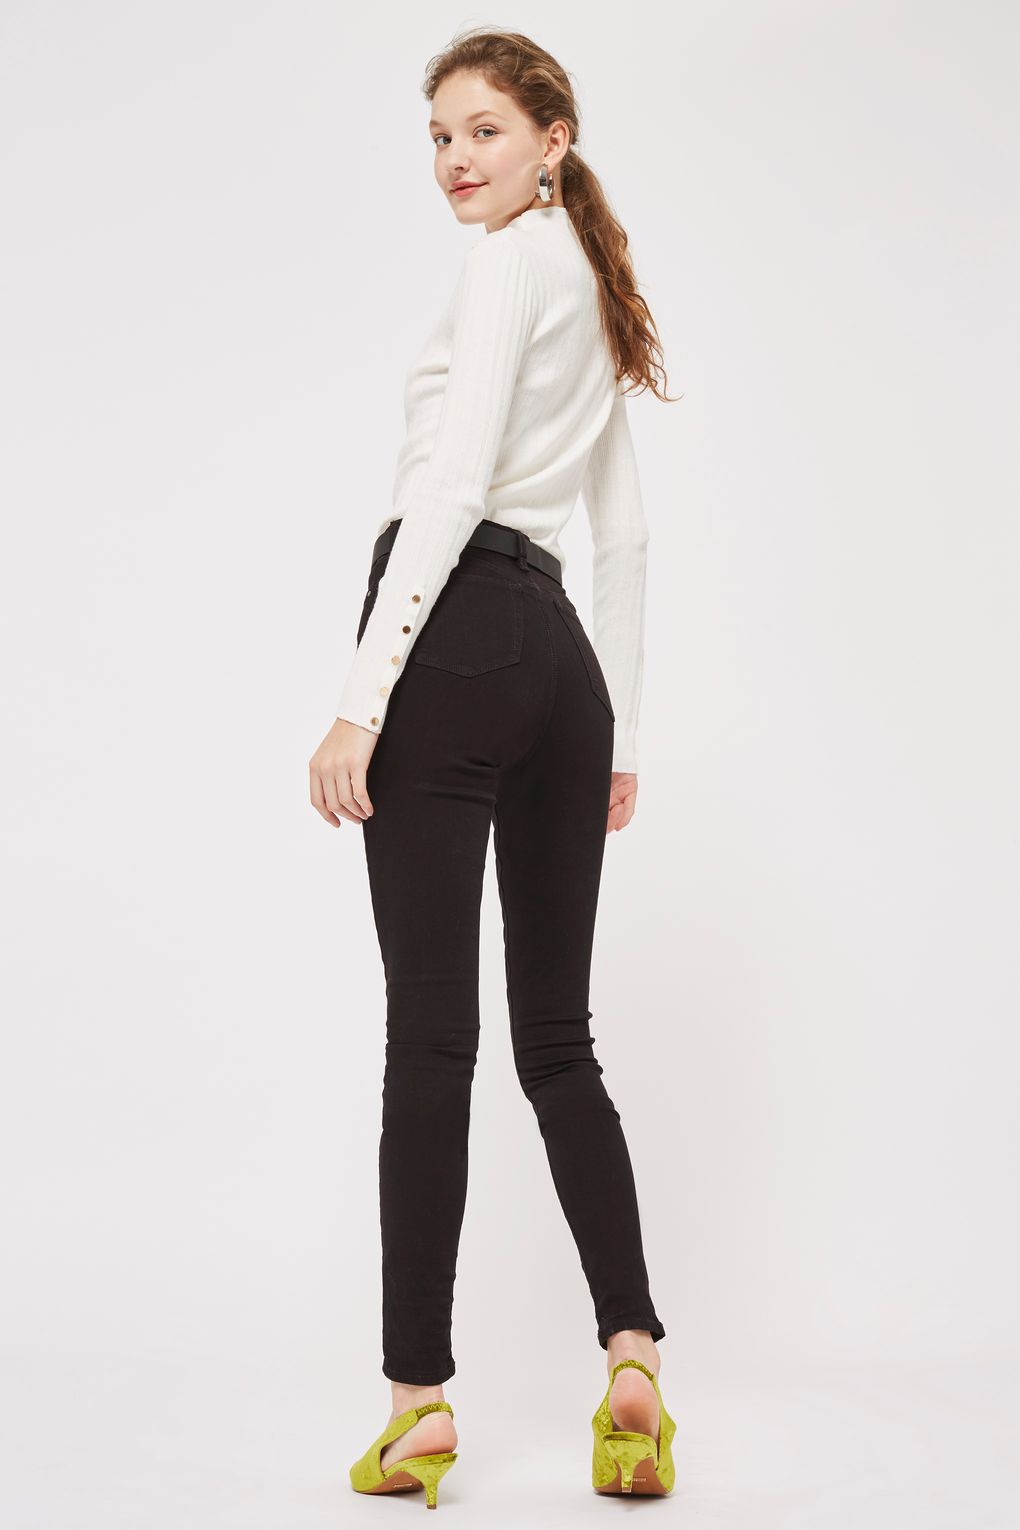 A model wearing black skinny jeans and a white turtleneck